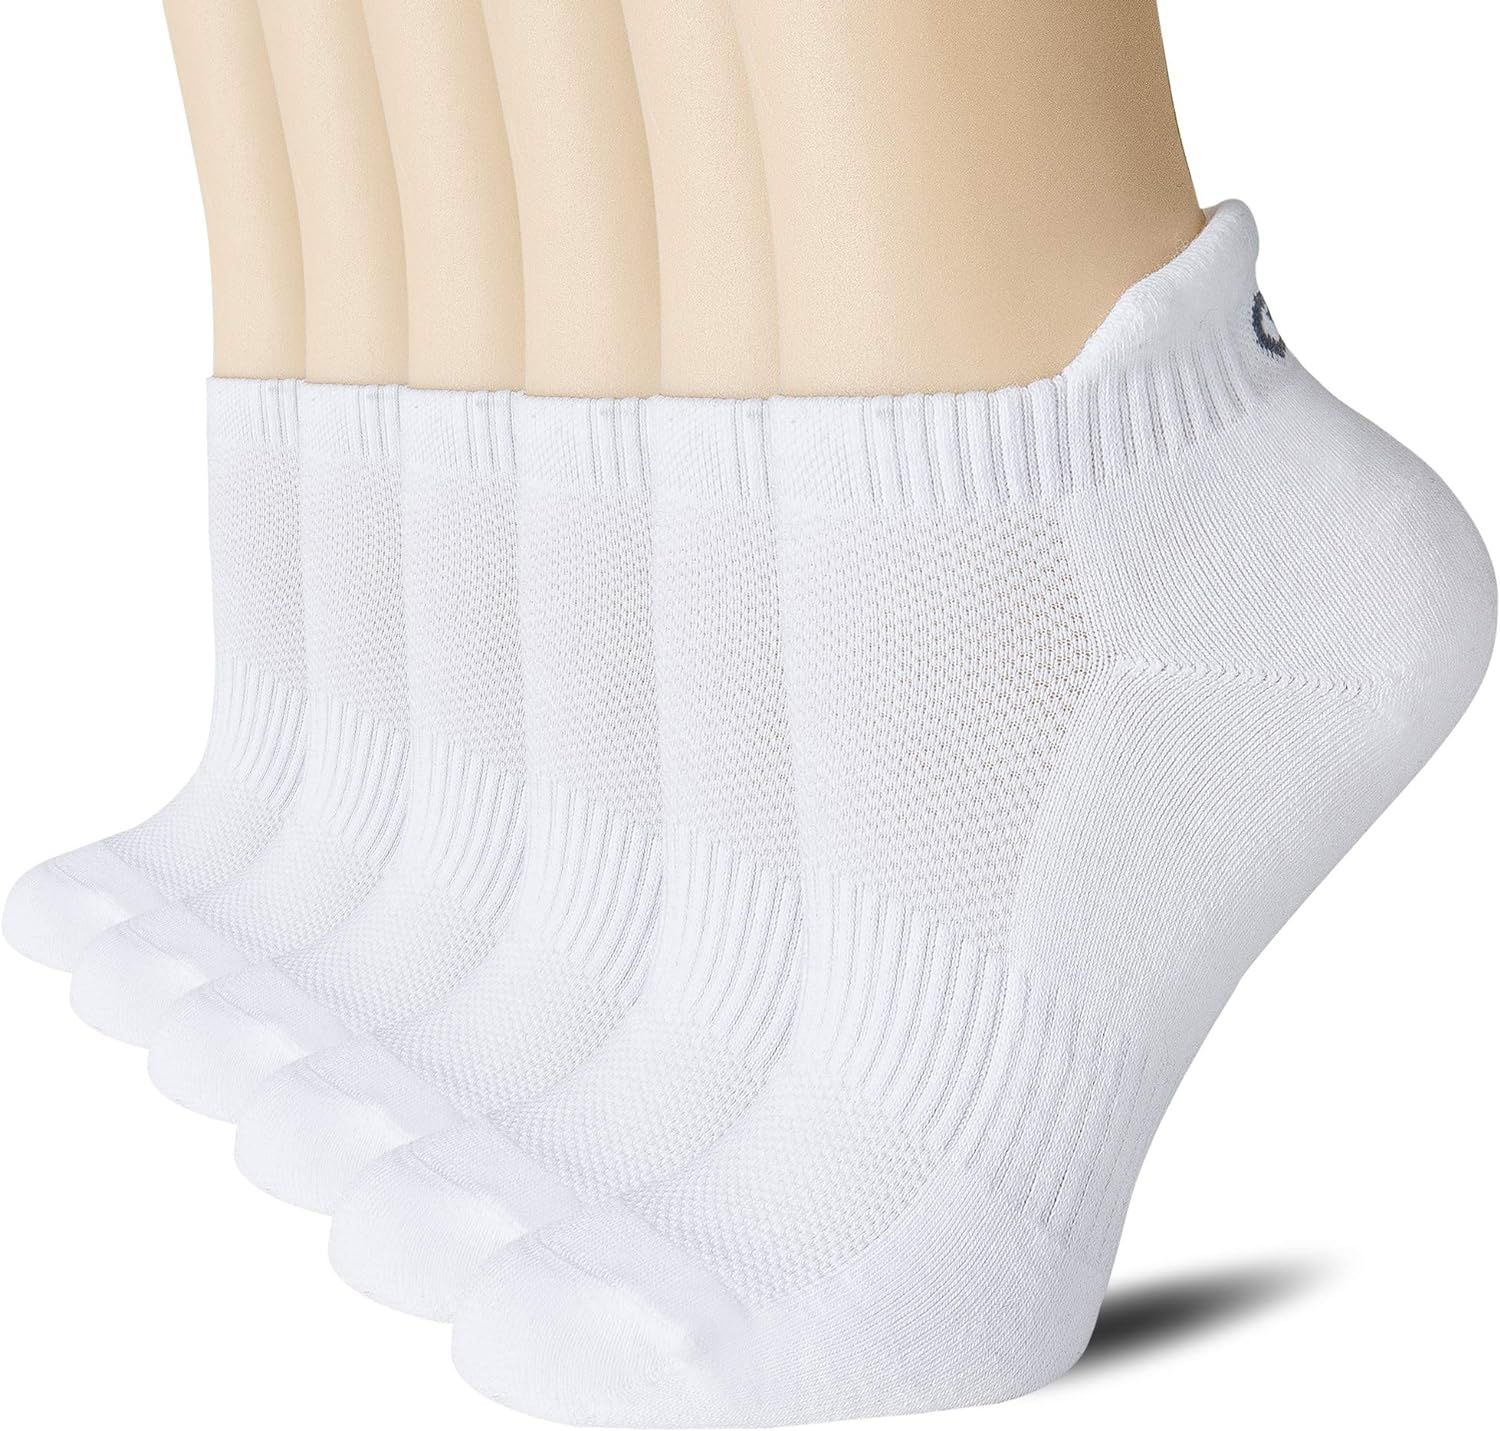 CelerSport Ankle Athletic Running Socks Low Cut Sports Tab Socks for Men and Women (6 Pairs) | Amazon (US)